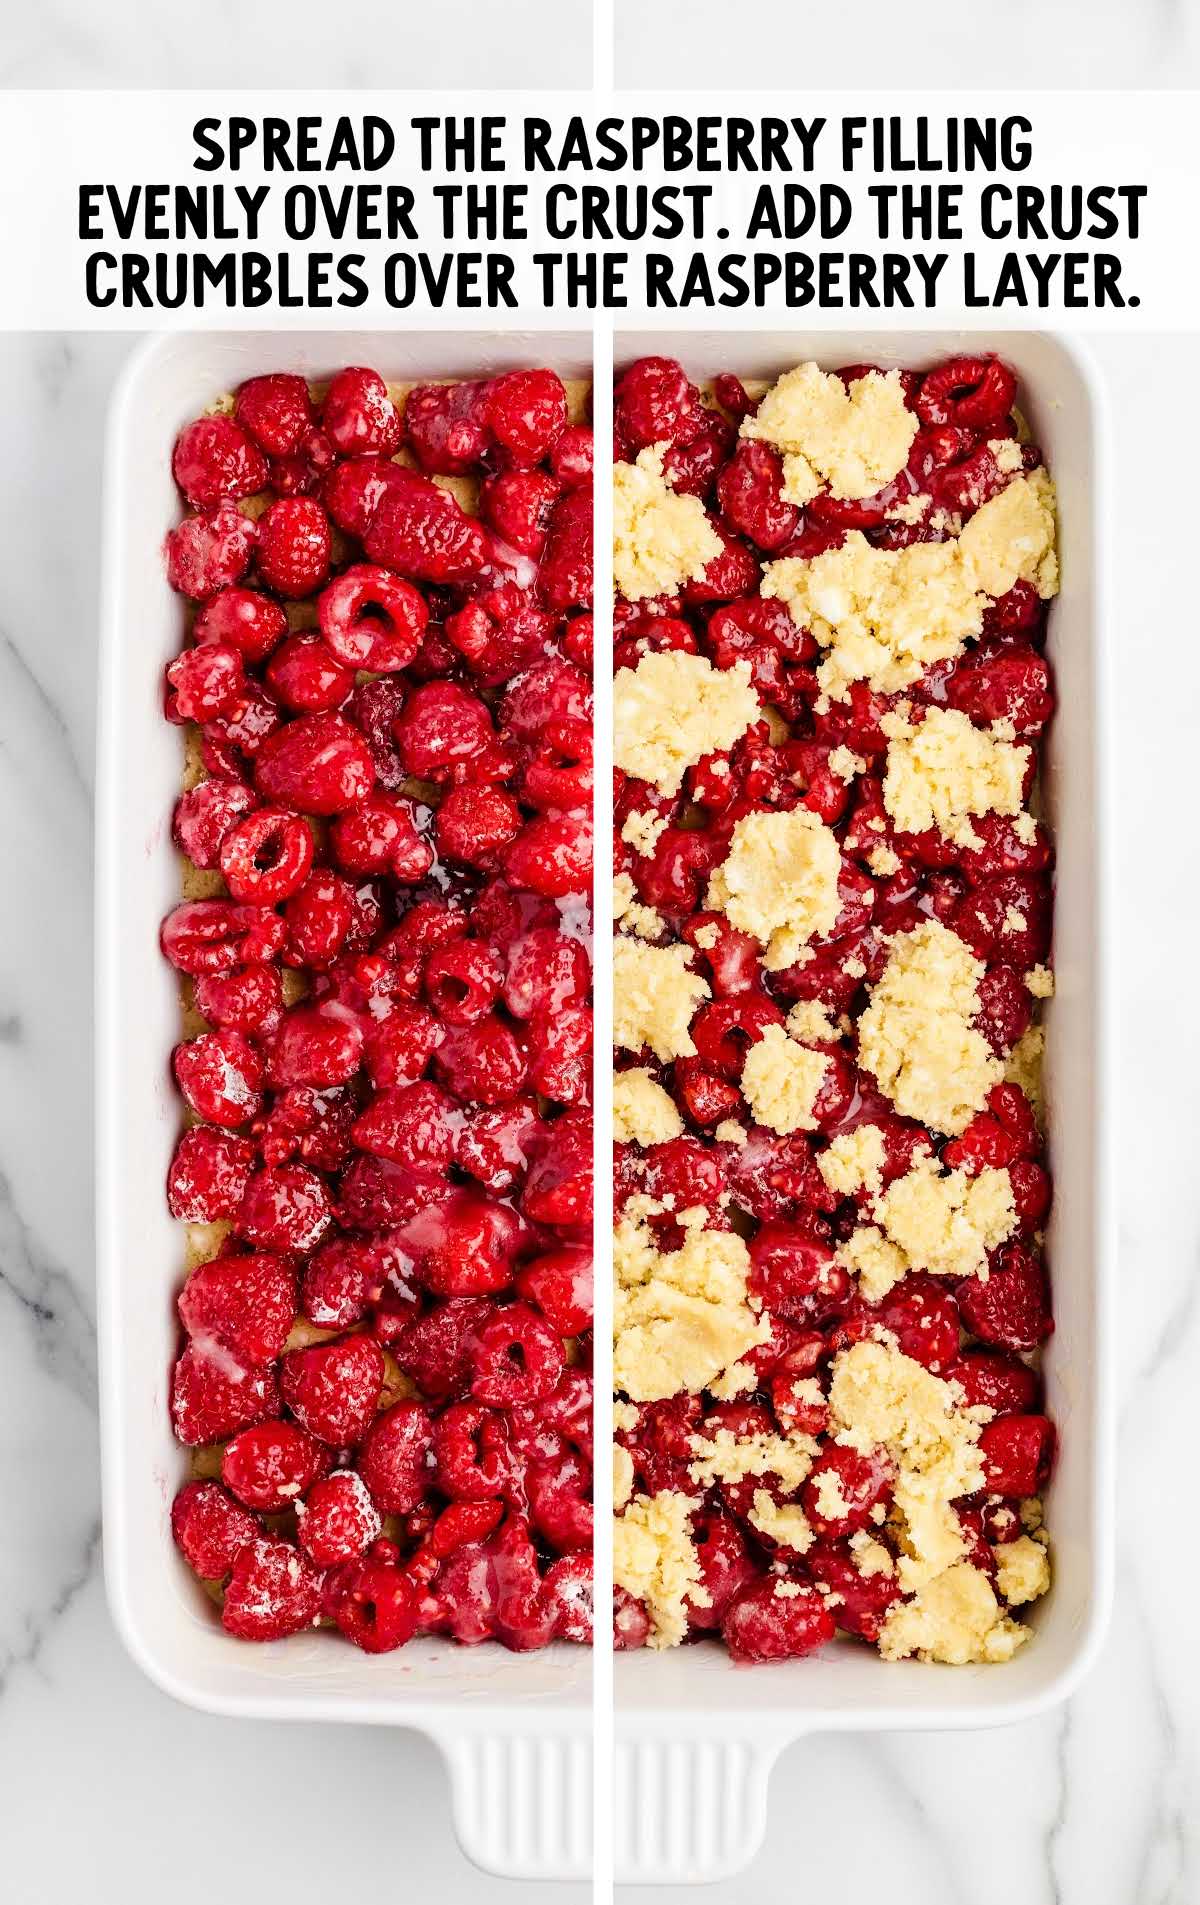 raspberry filling spread over the crust and then topped with crust crumbles